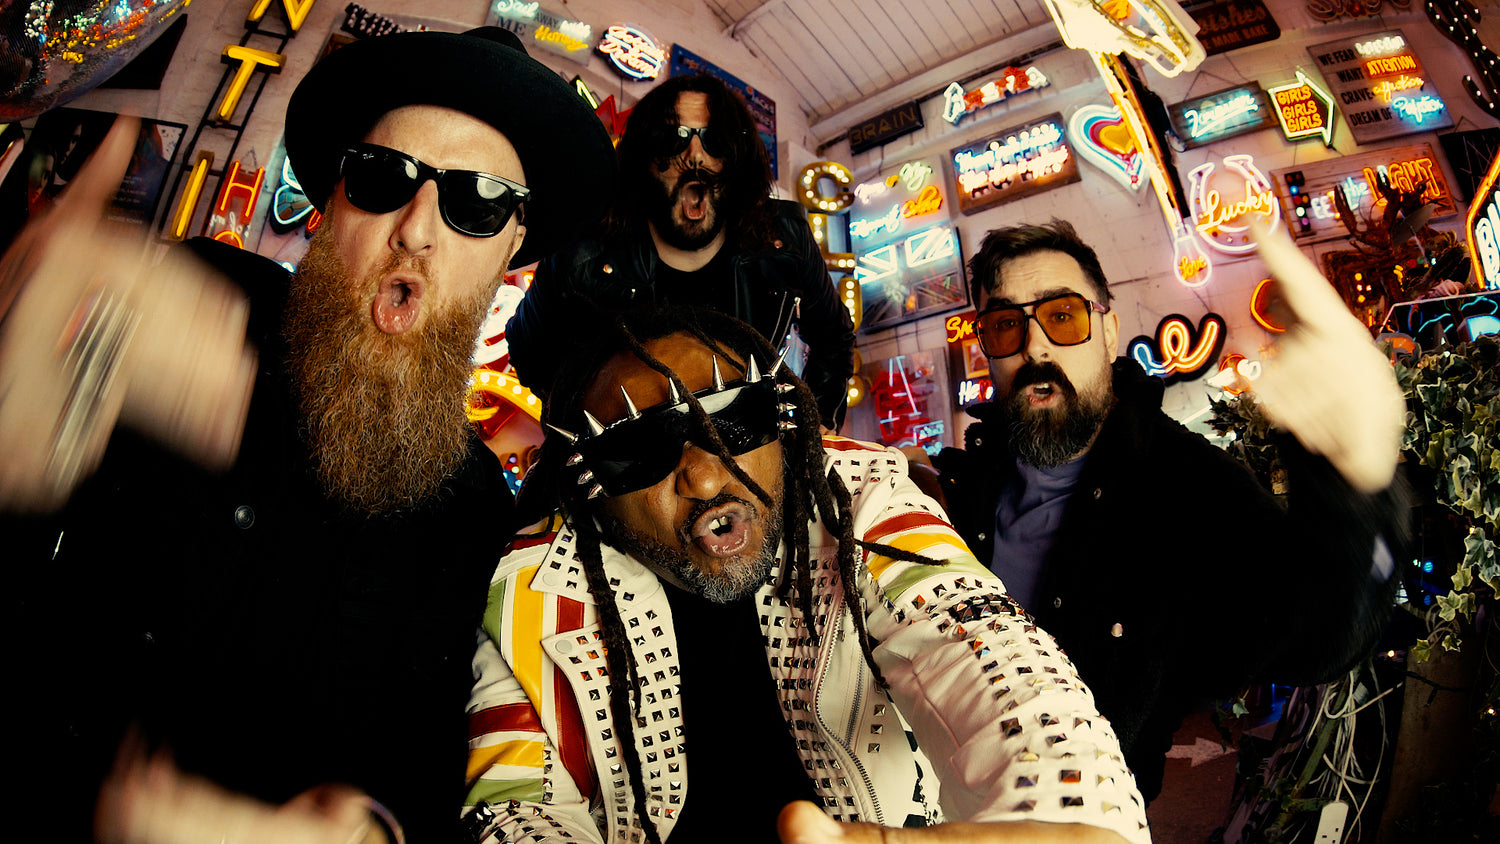 RAGGA METAL STALWARTS SKINDRED ANNOUNCE NEW ALBUM SMILE, WITH KNOTFEST PREMIERE OF FIRST SINGLE 'GIMME THAT BOOM'